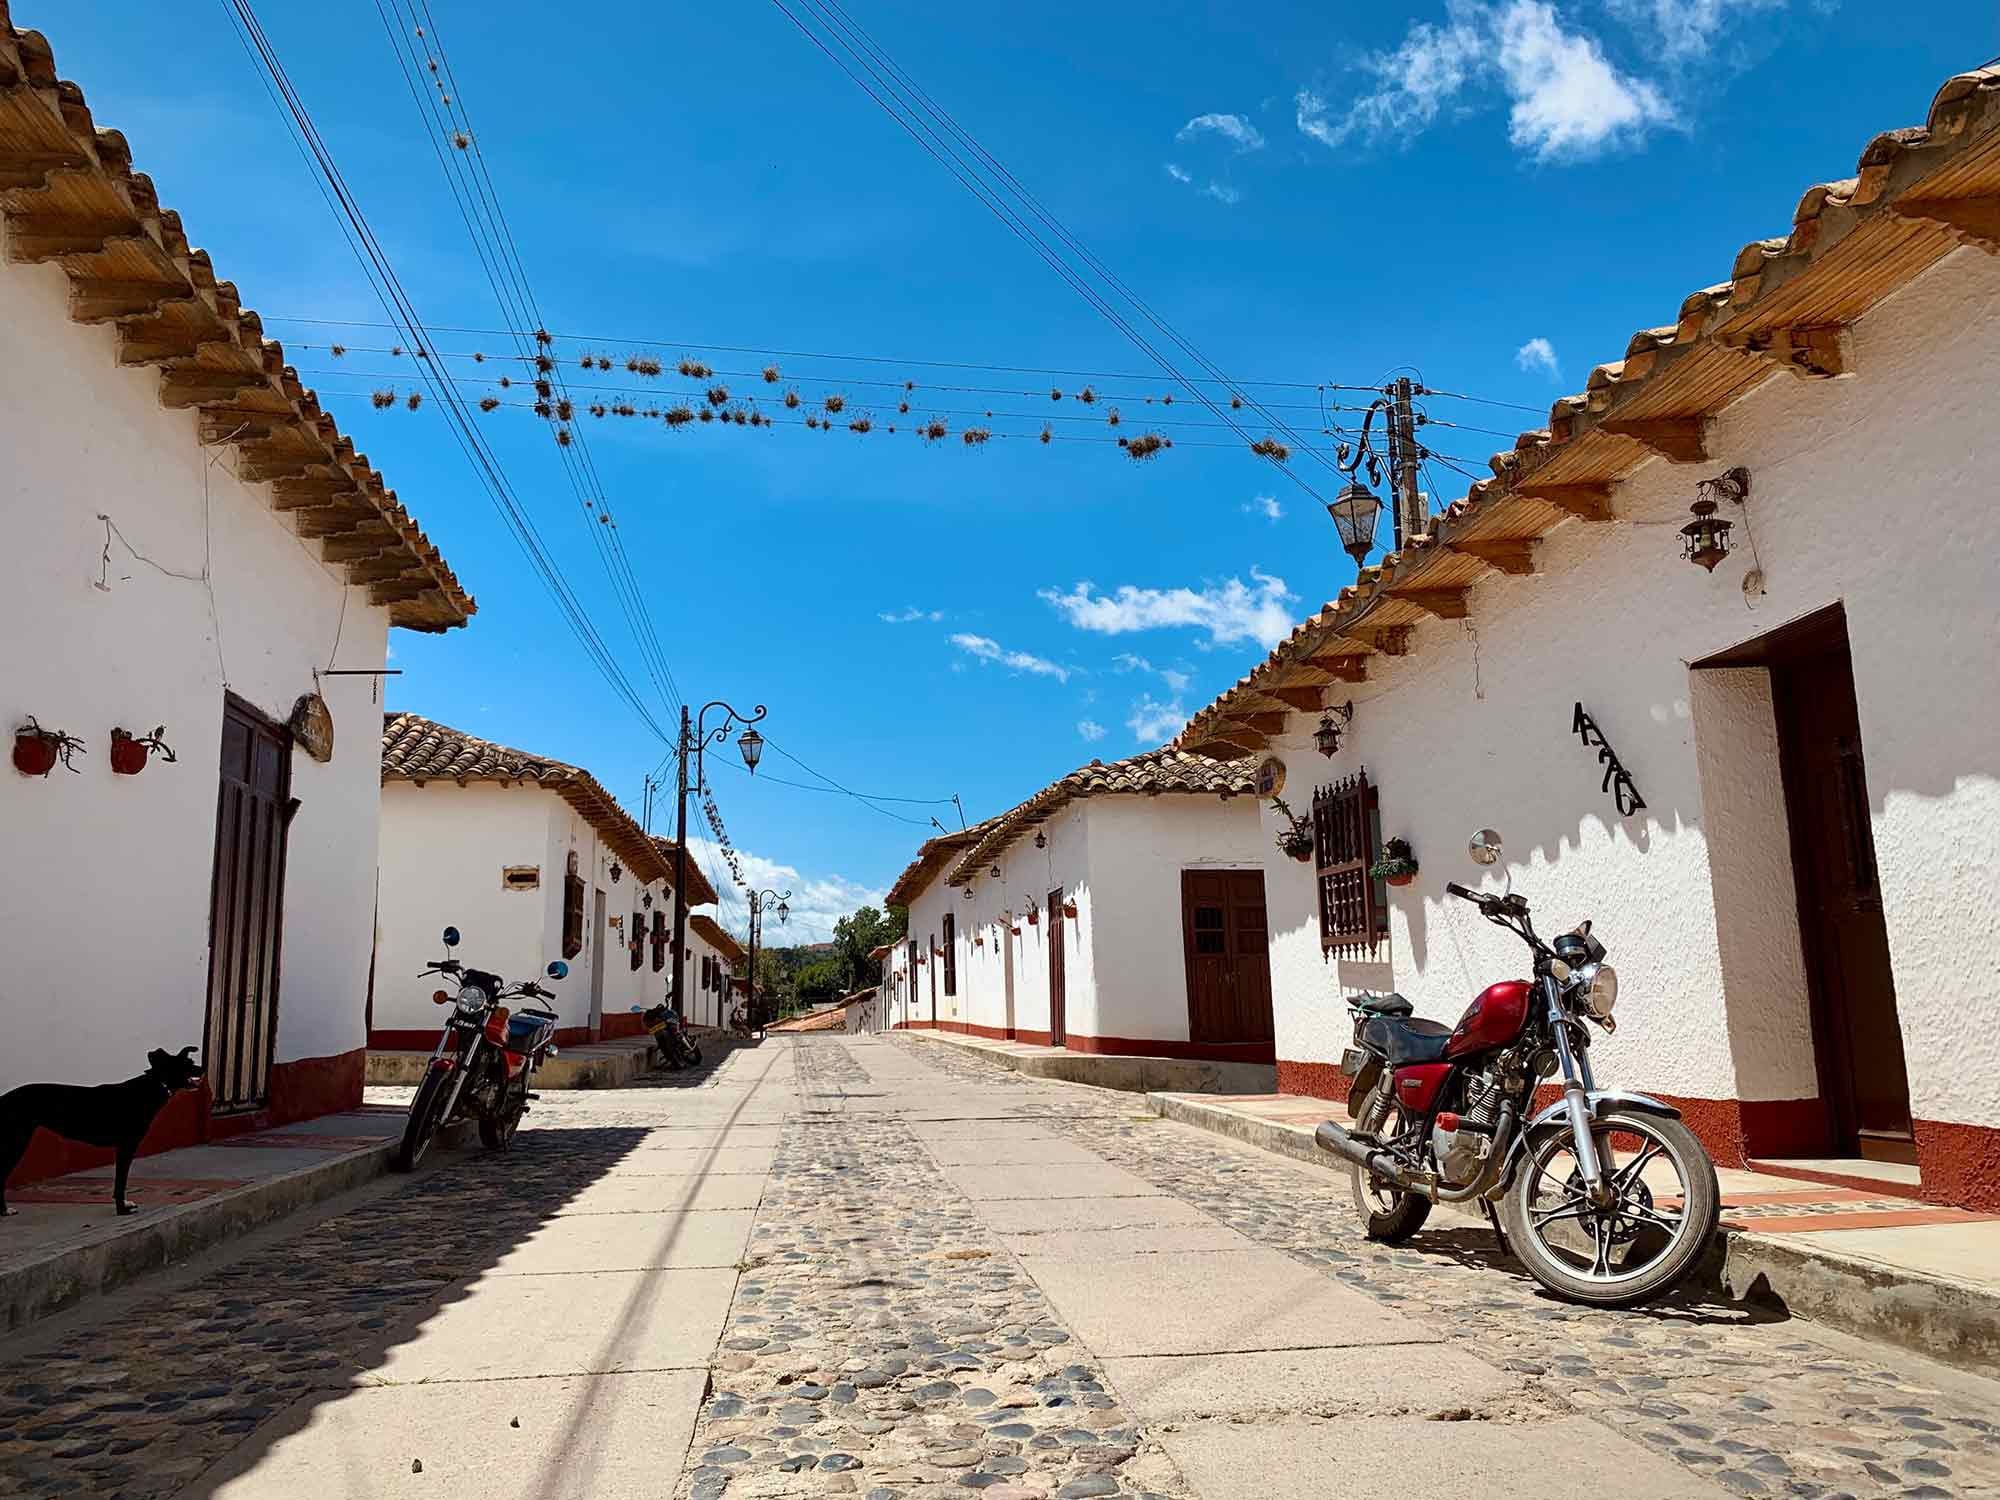 The only foreign tourist; Playa de Belen is one of the more difficult to reach of Colombia’s 17 Heritage Towns (Pueblos Patrimonios), and well worth the journey.